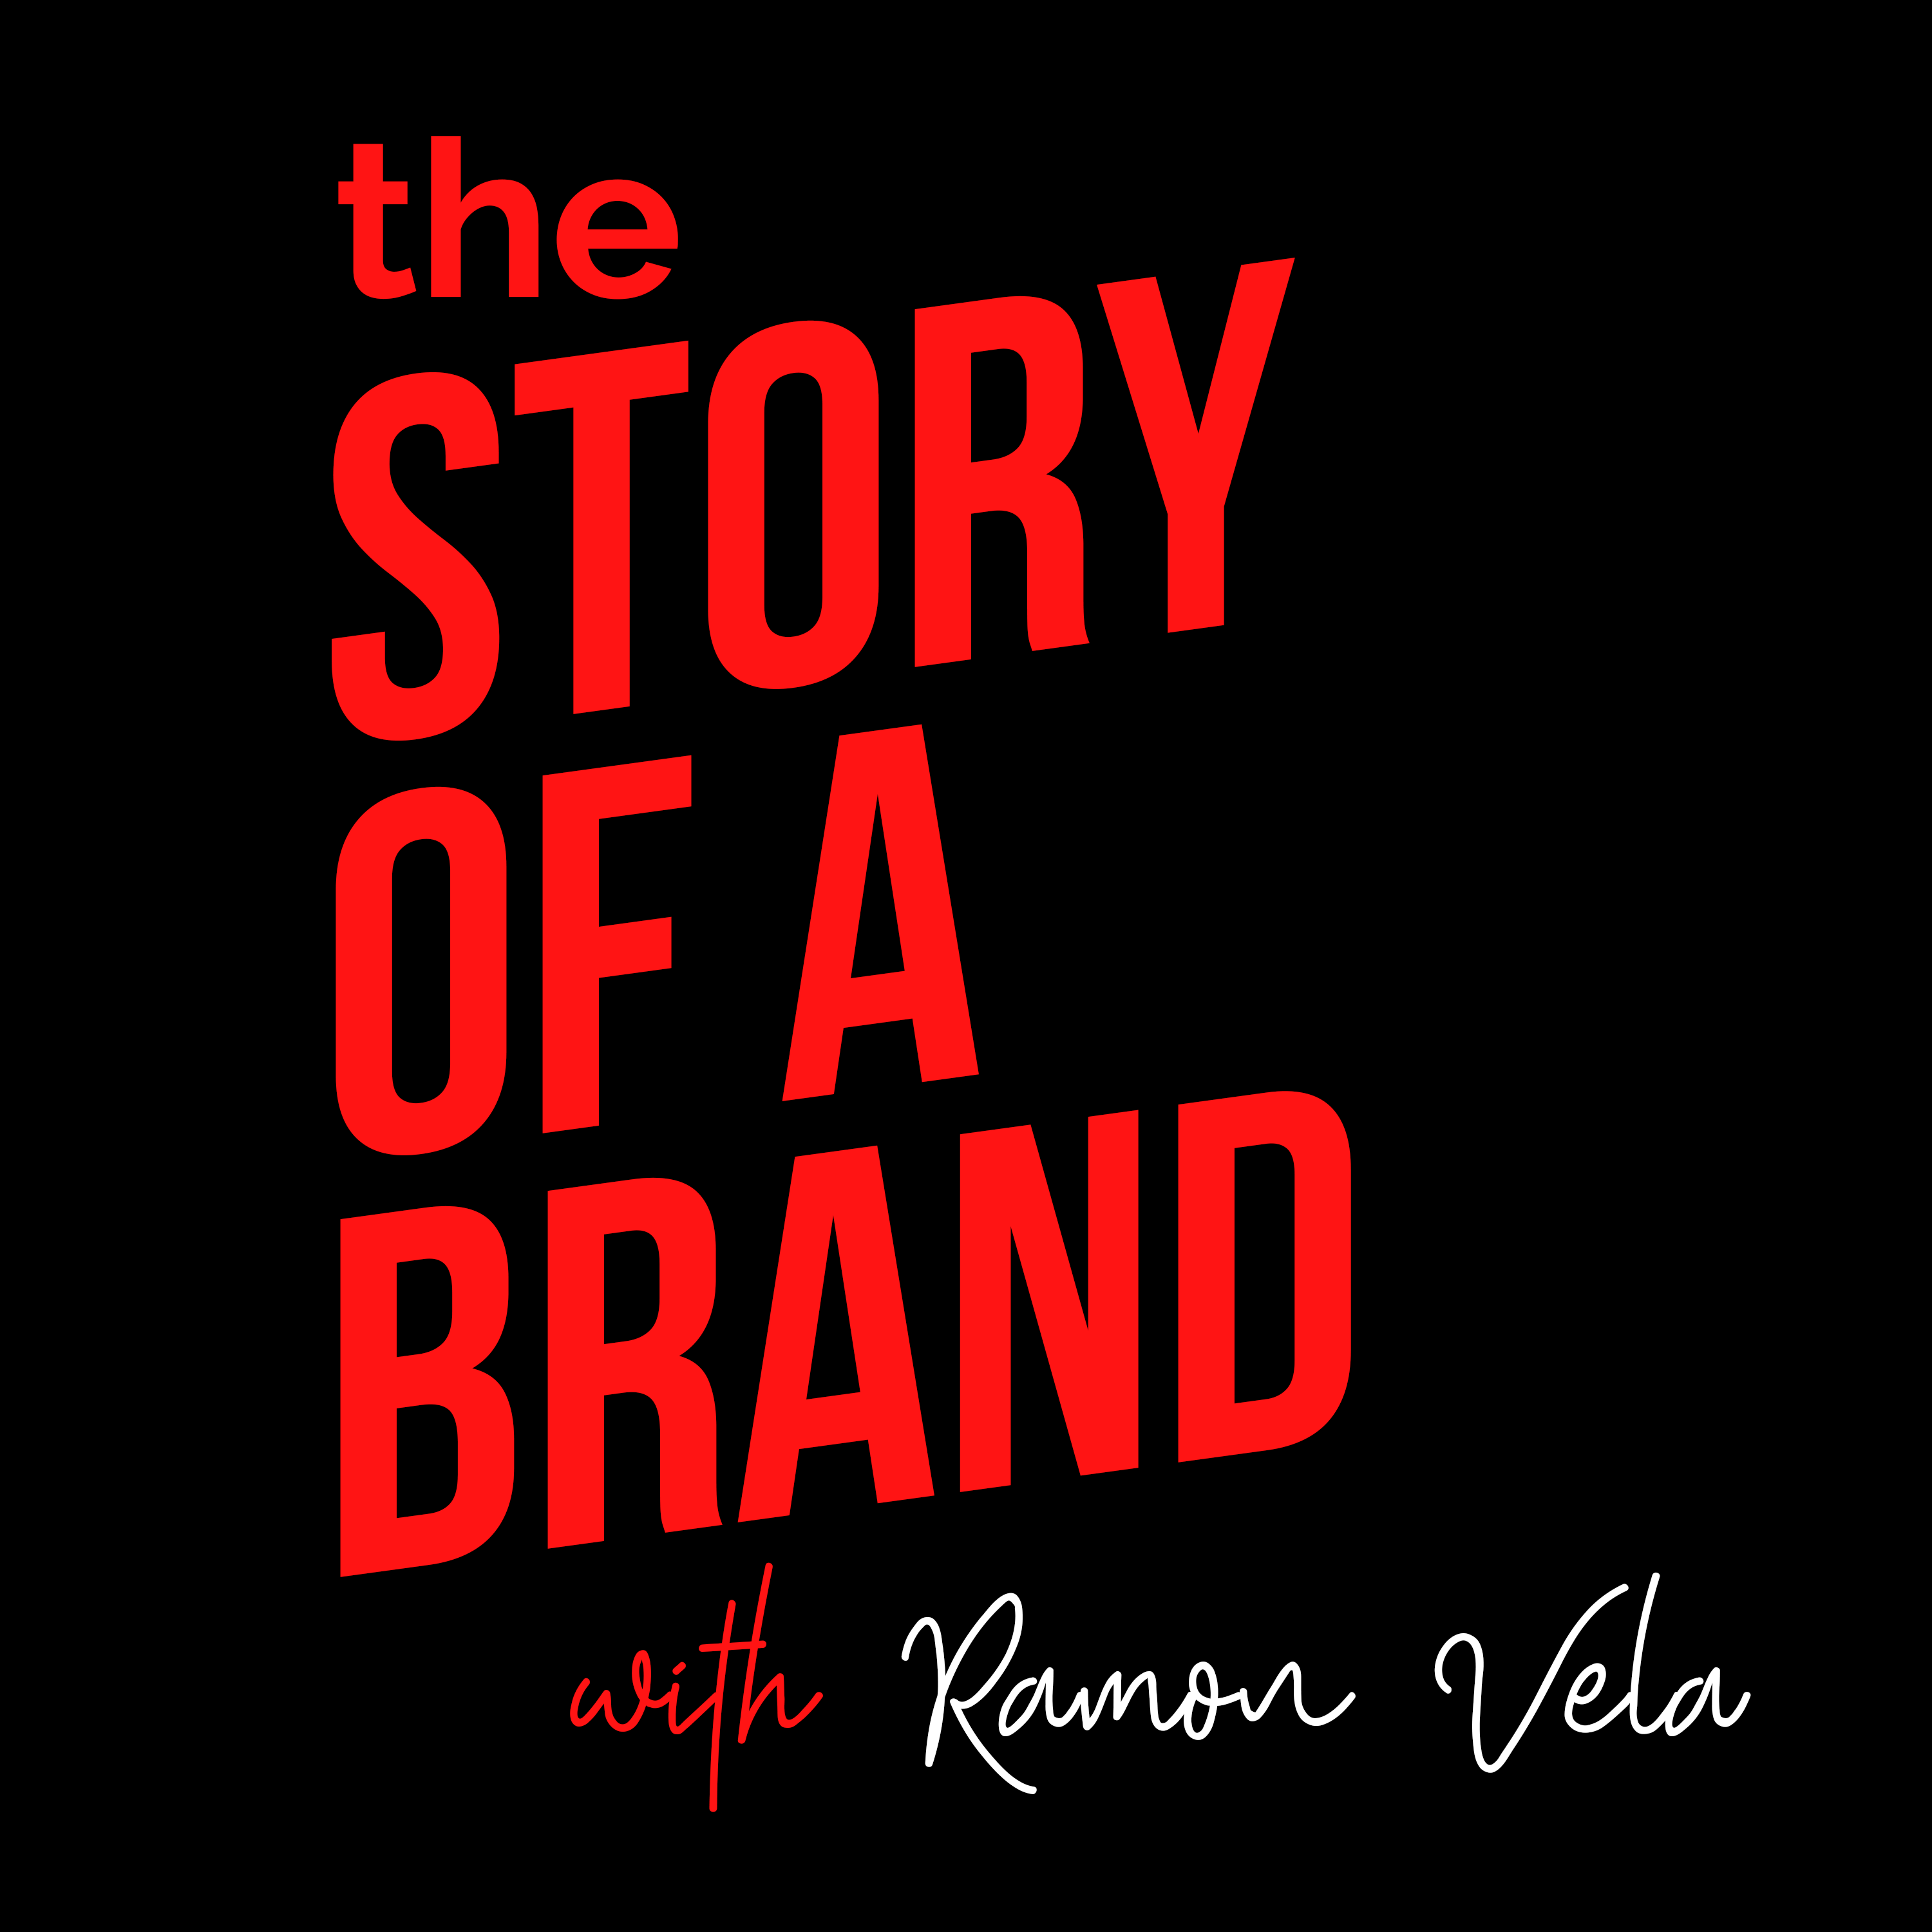 The story of a brand podcast logo